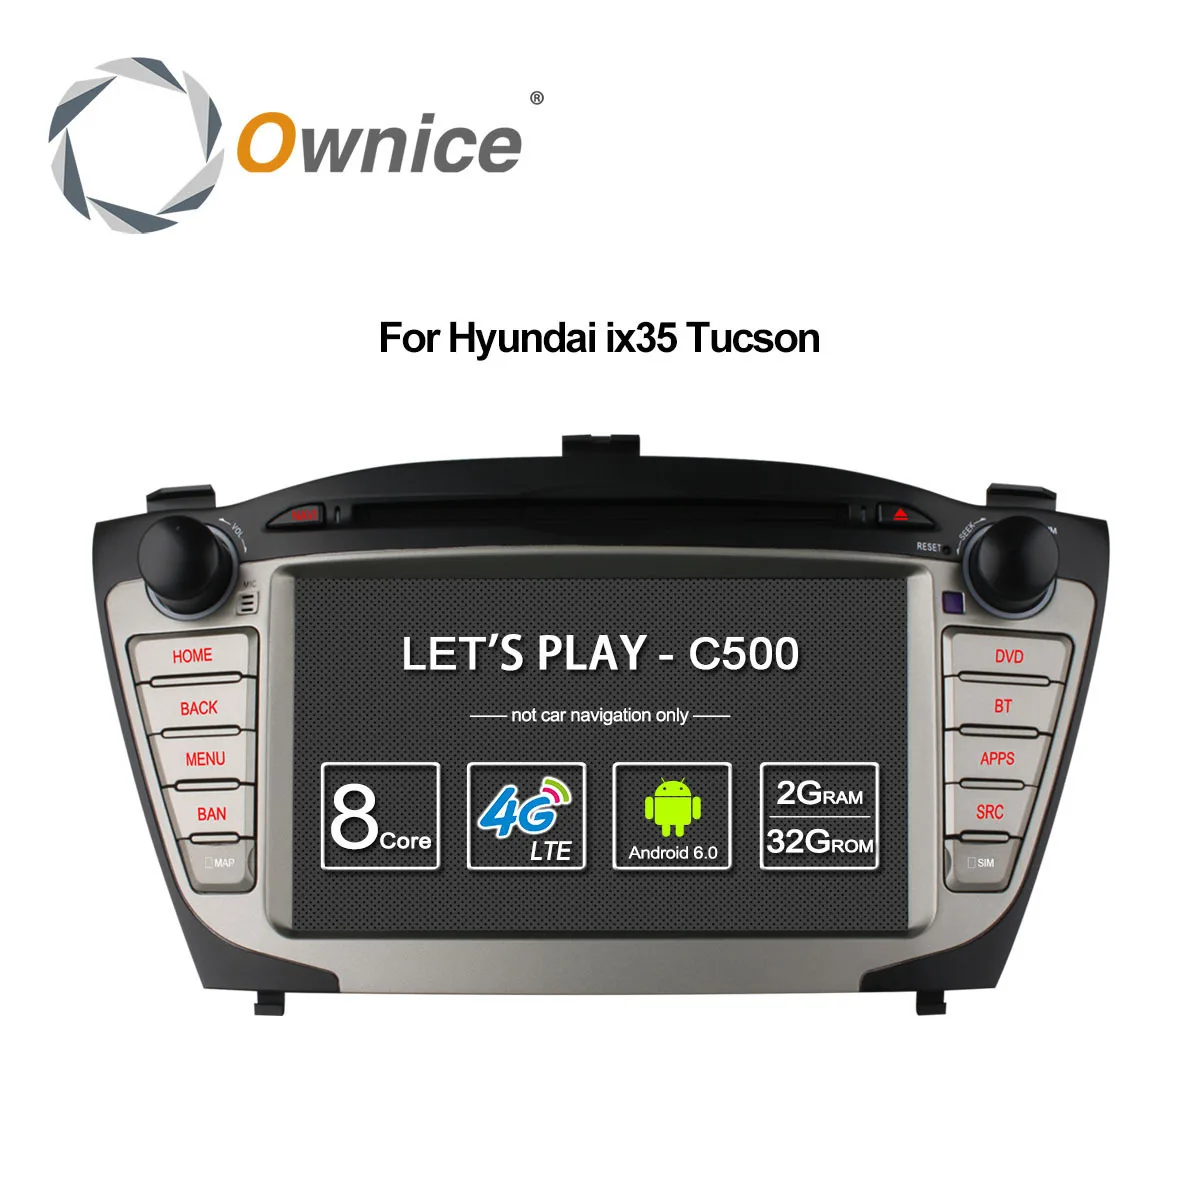 Excellent Ownice C500 4G SIM LTE for Hyundai iX35 Tucson 2009 - 2015 Android 6.0 8 Core 2 din car dvd gps radio 2GB RAM 32GB support DAB+ 0